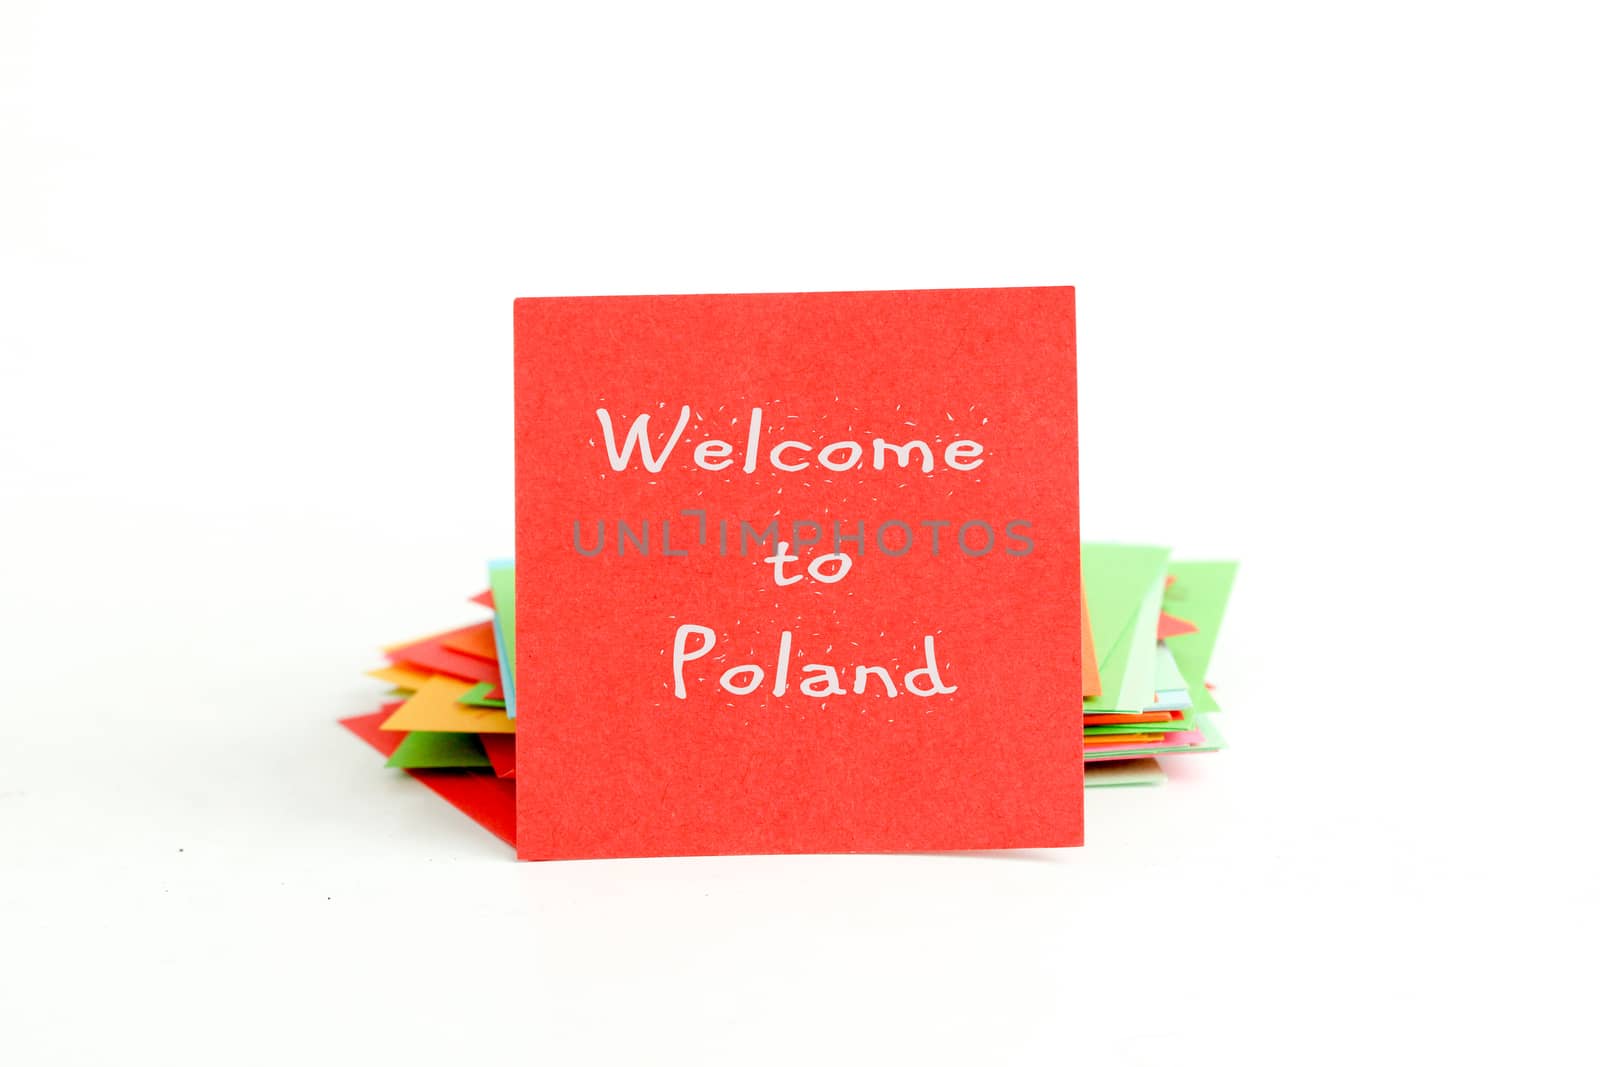 picture of a red note paper with text welcome to poland